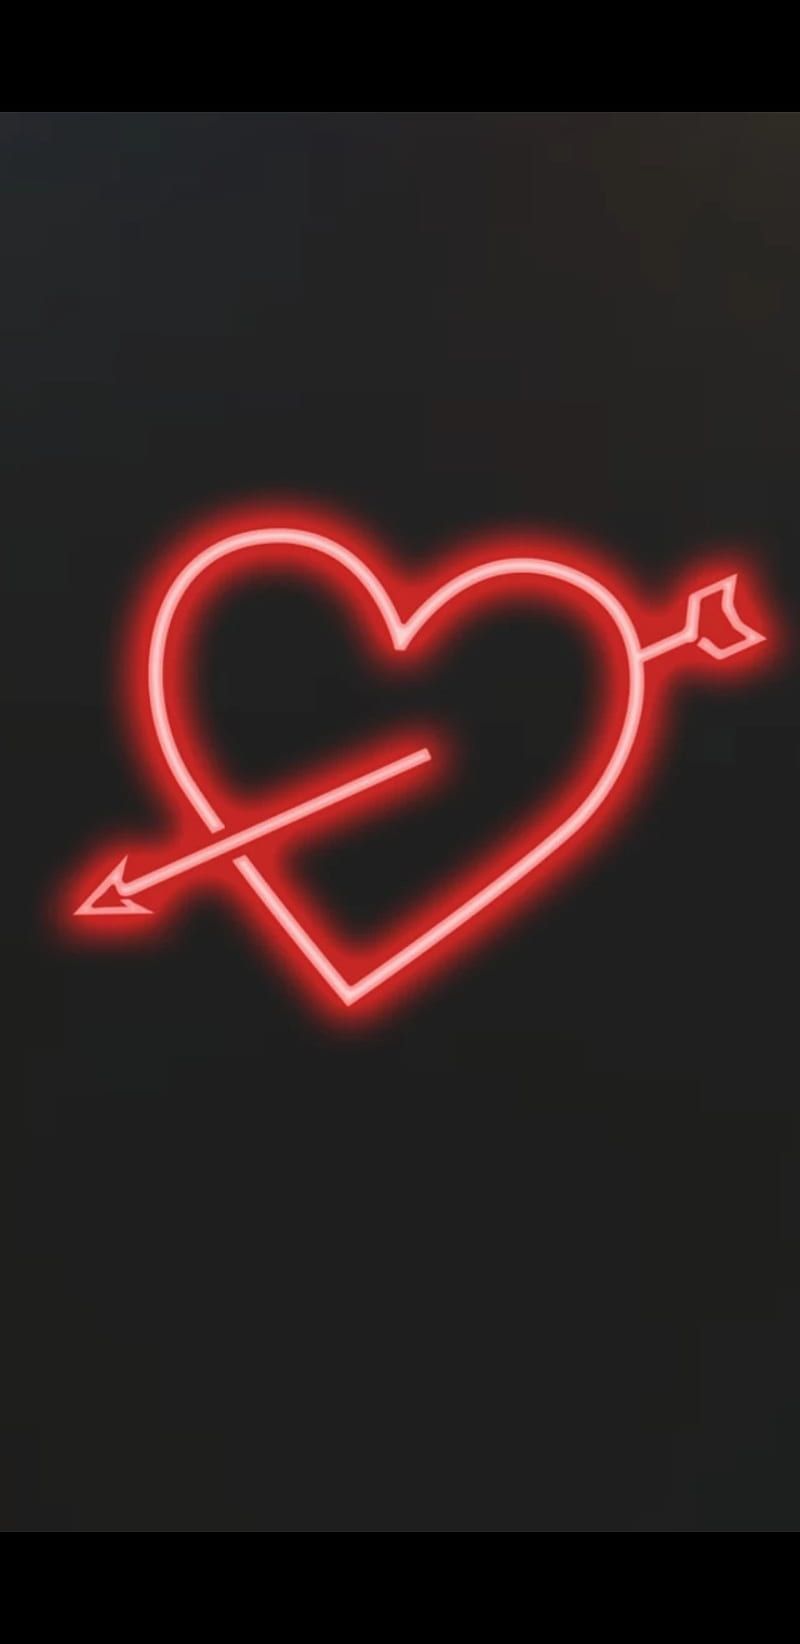 A neon heart with an arrow in it - Cupid